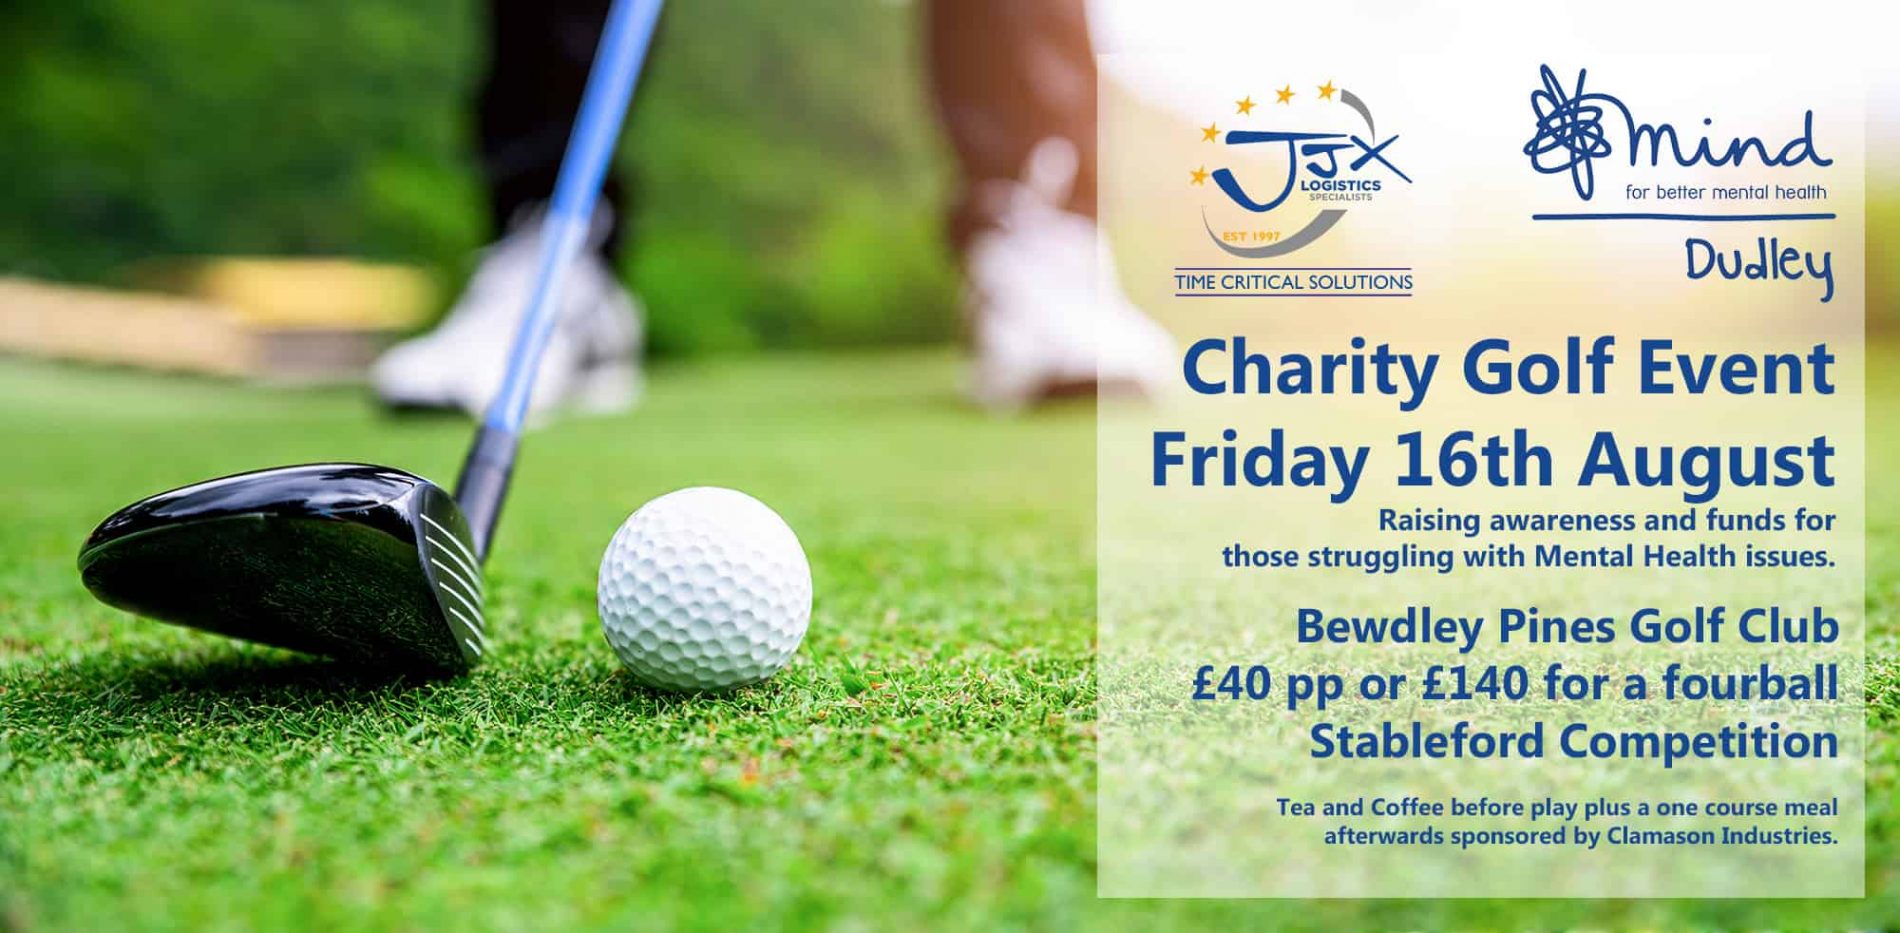 Charity Golf Event in aid of Dudley Mind